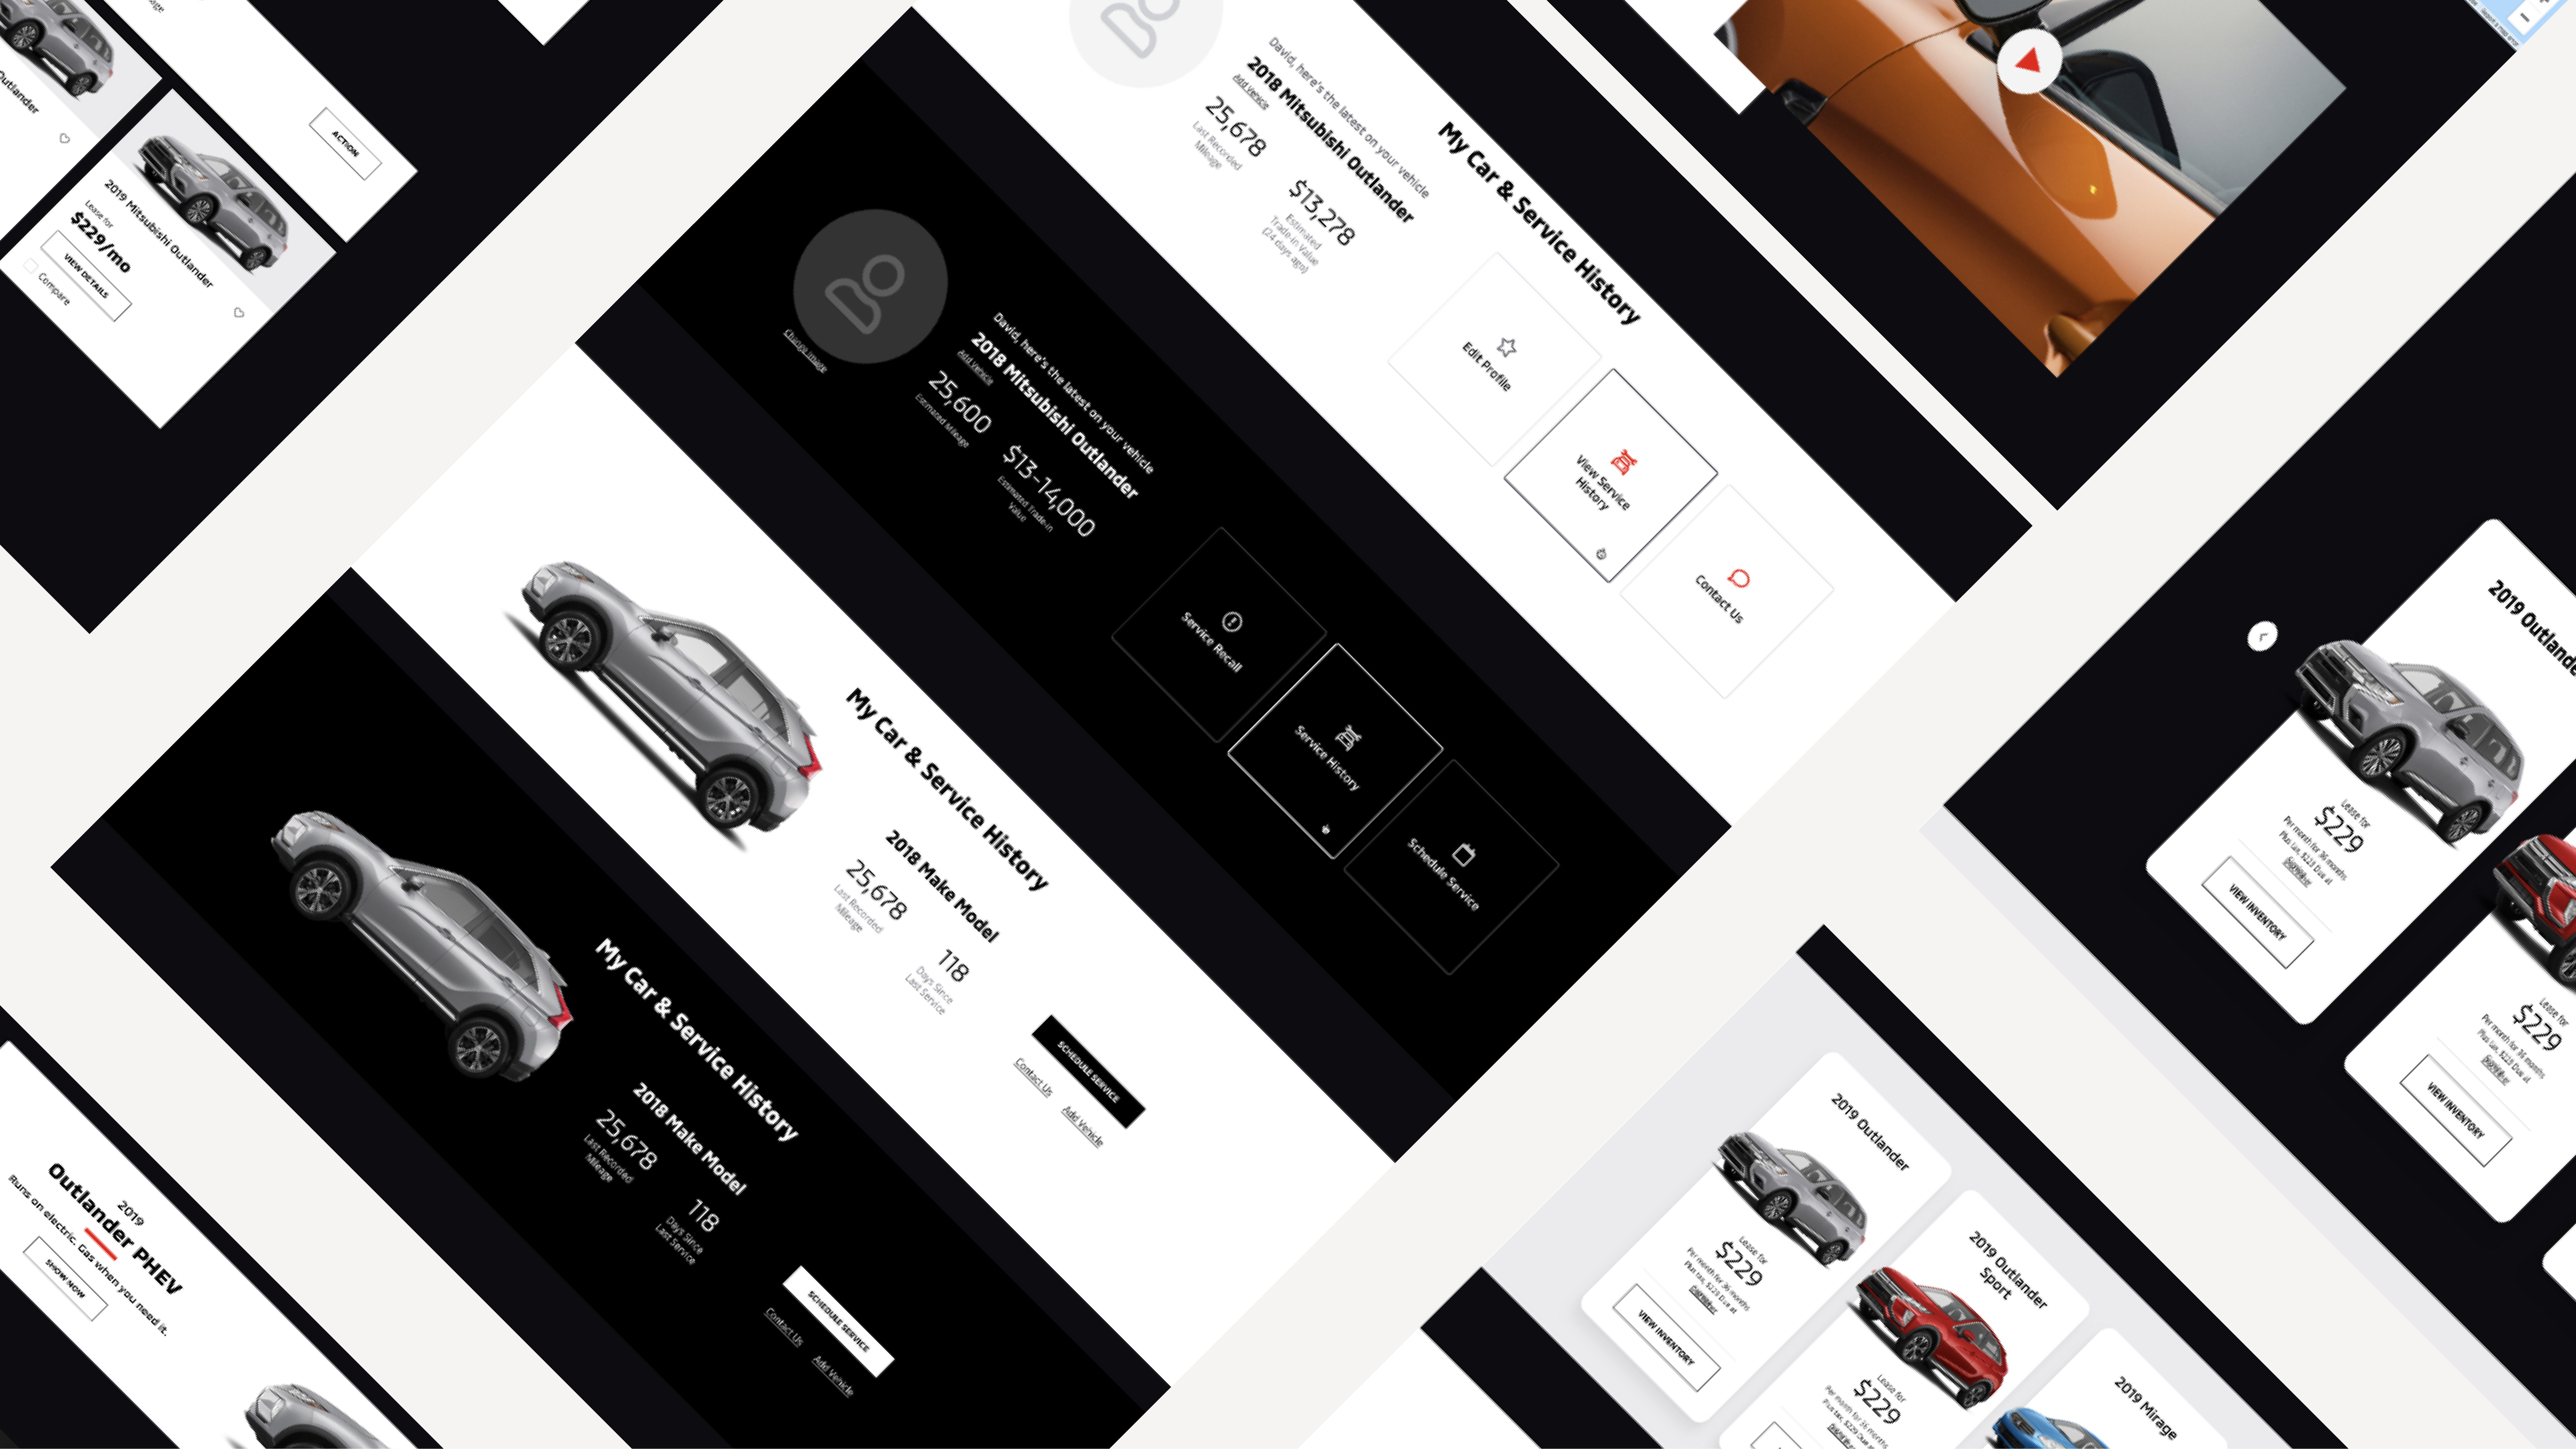 design components in a design system for automotive brands